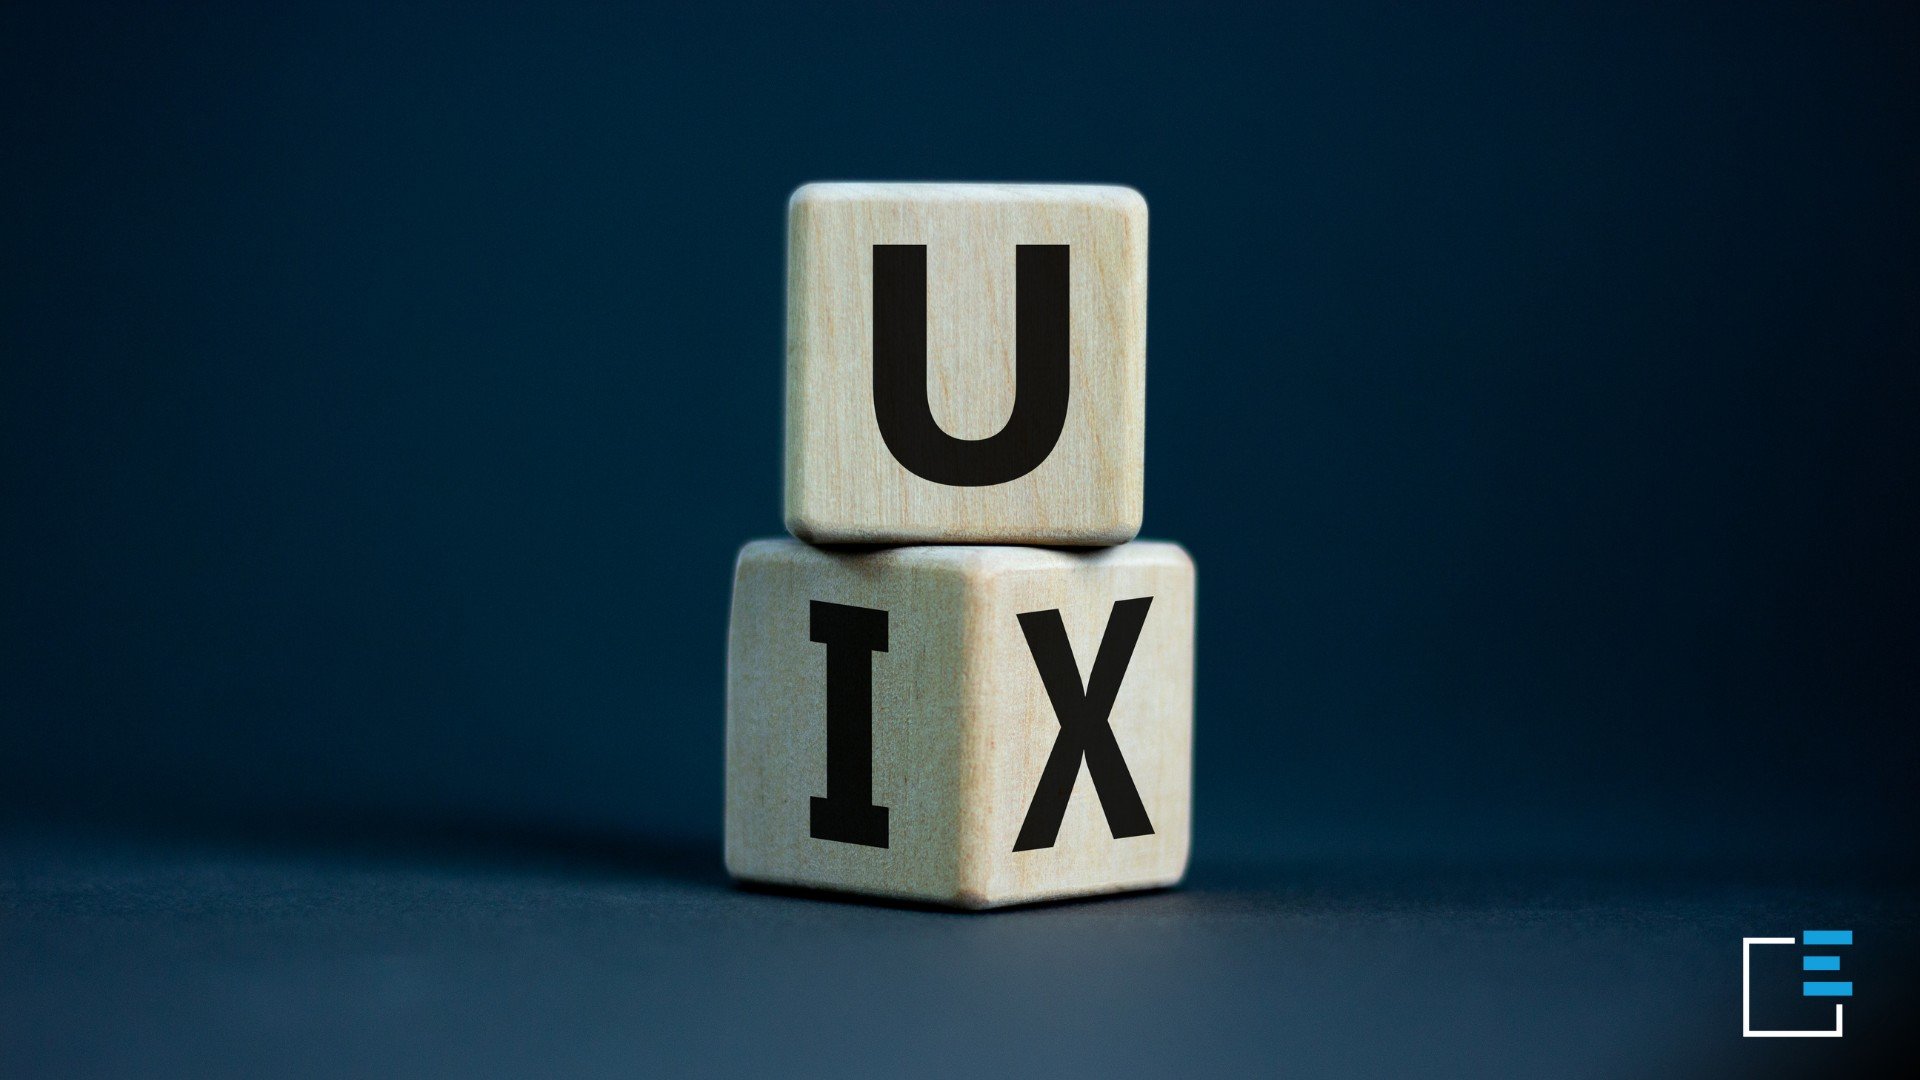 The importance of UX and UI design in website creation